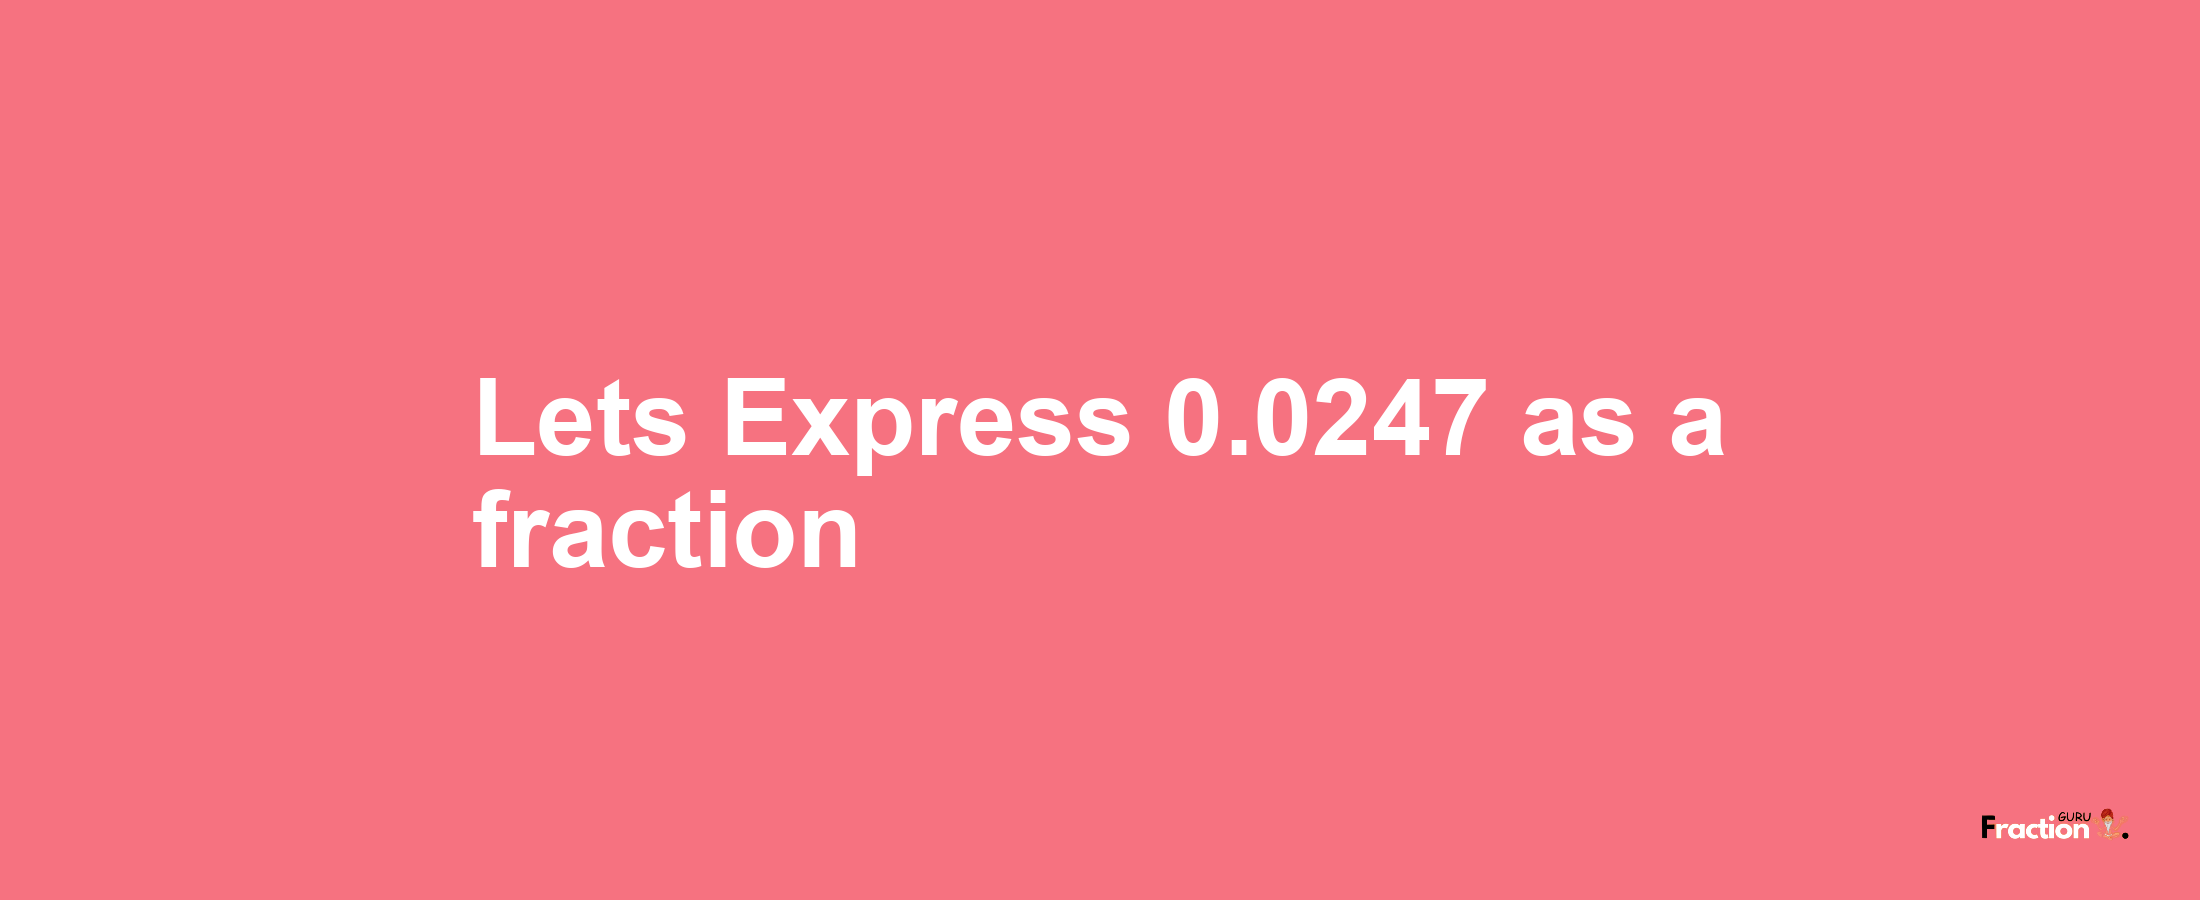 Lets Express 0.0247 as afraction